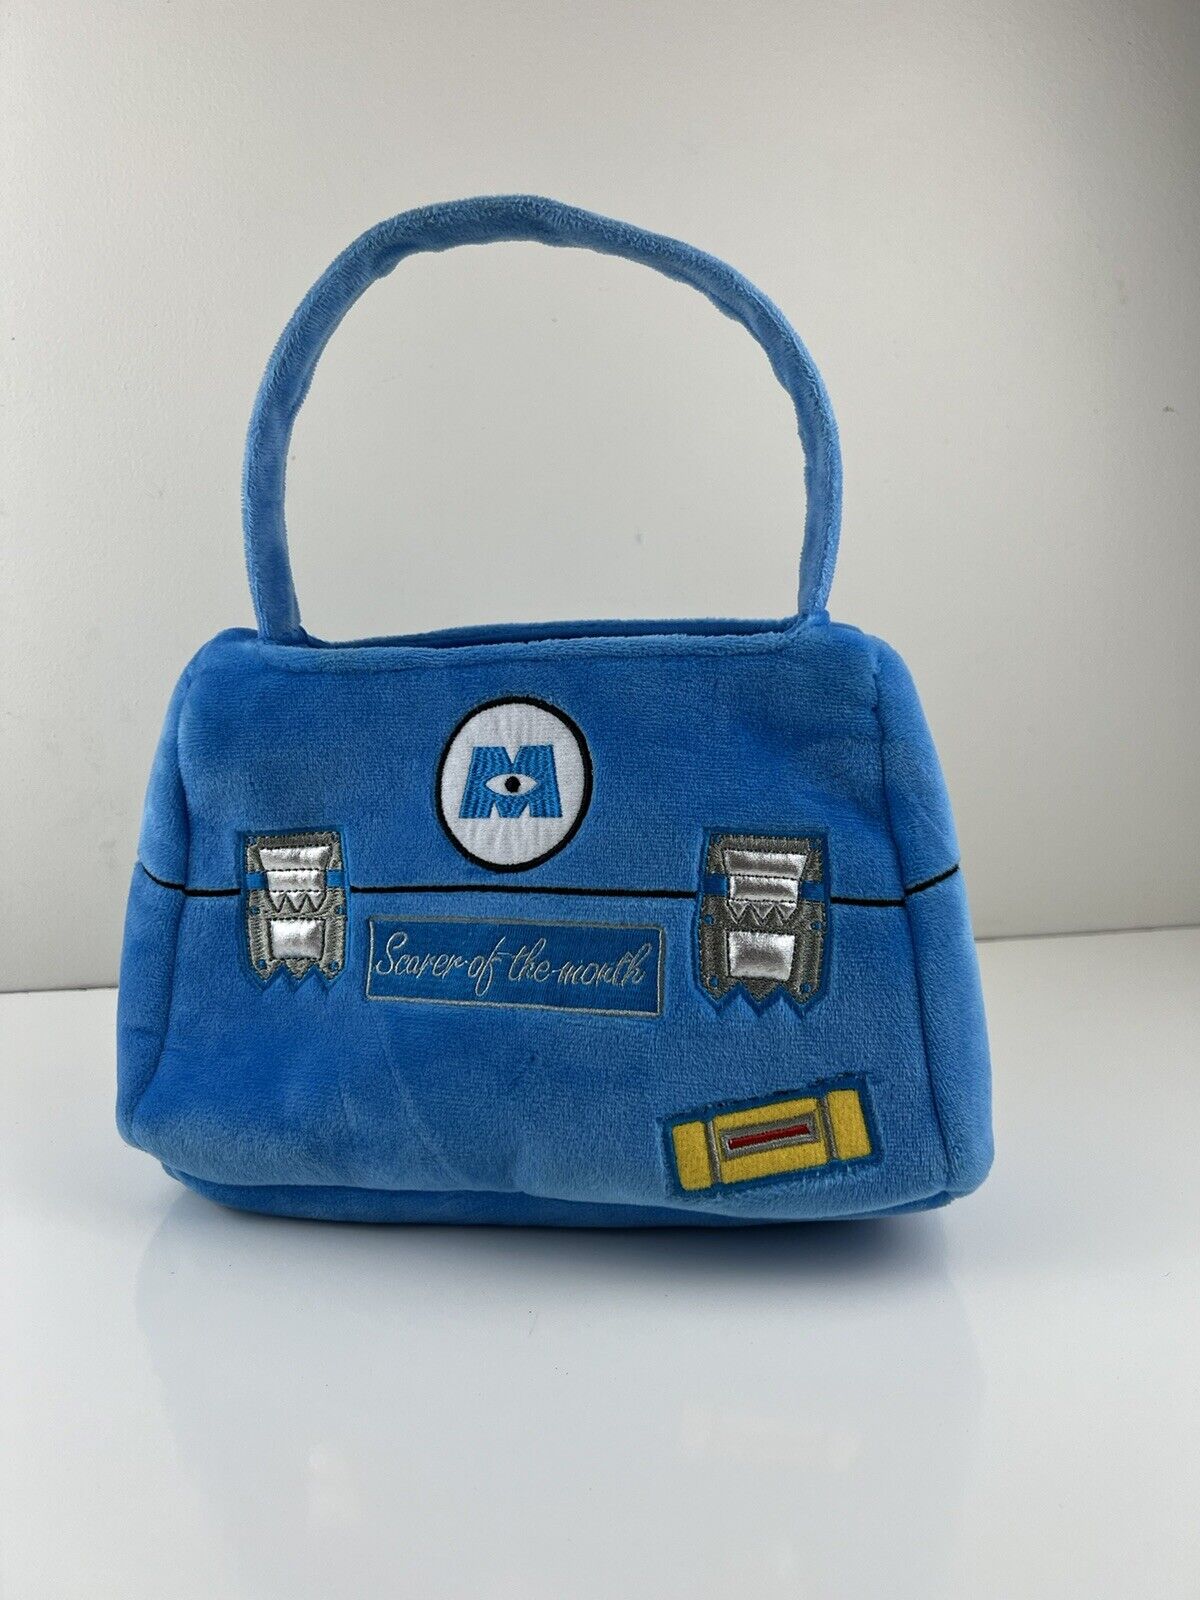 Monsters Inc Plush Bag Pixar Purse Scarer Of The Month Halloween Candy Bucket